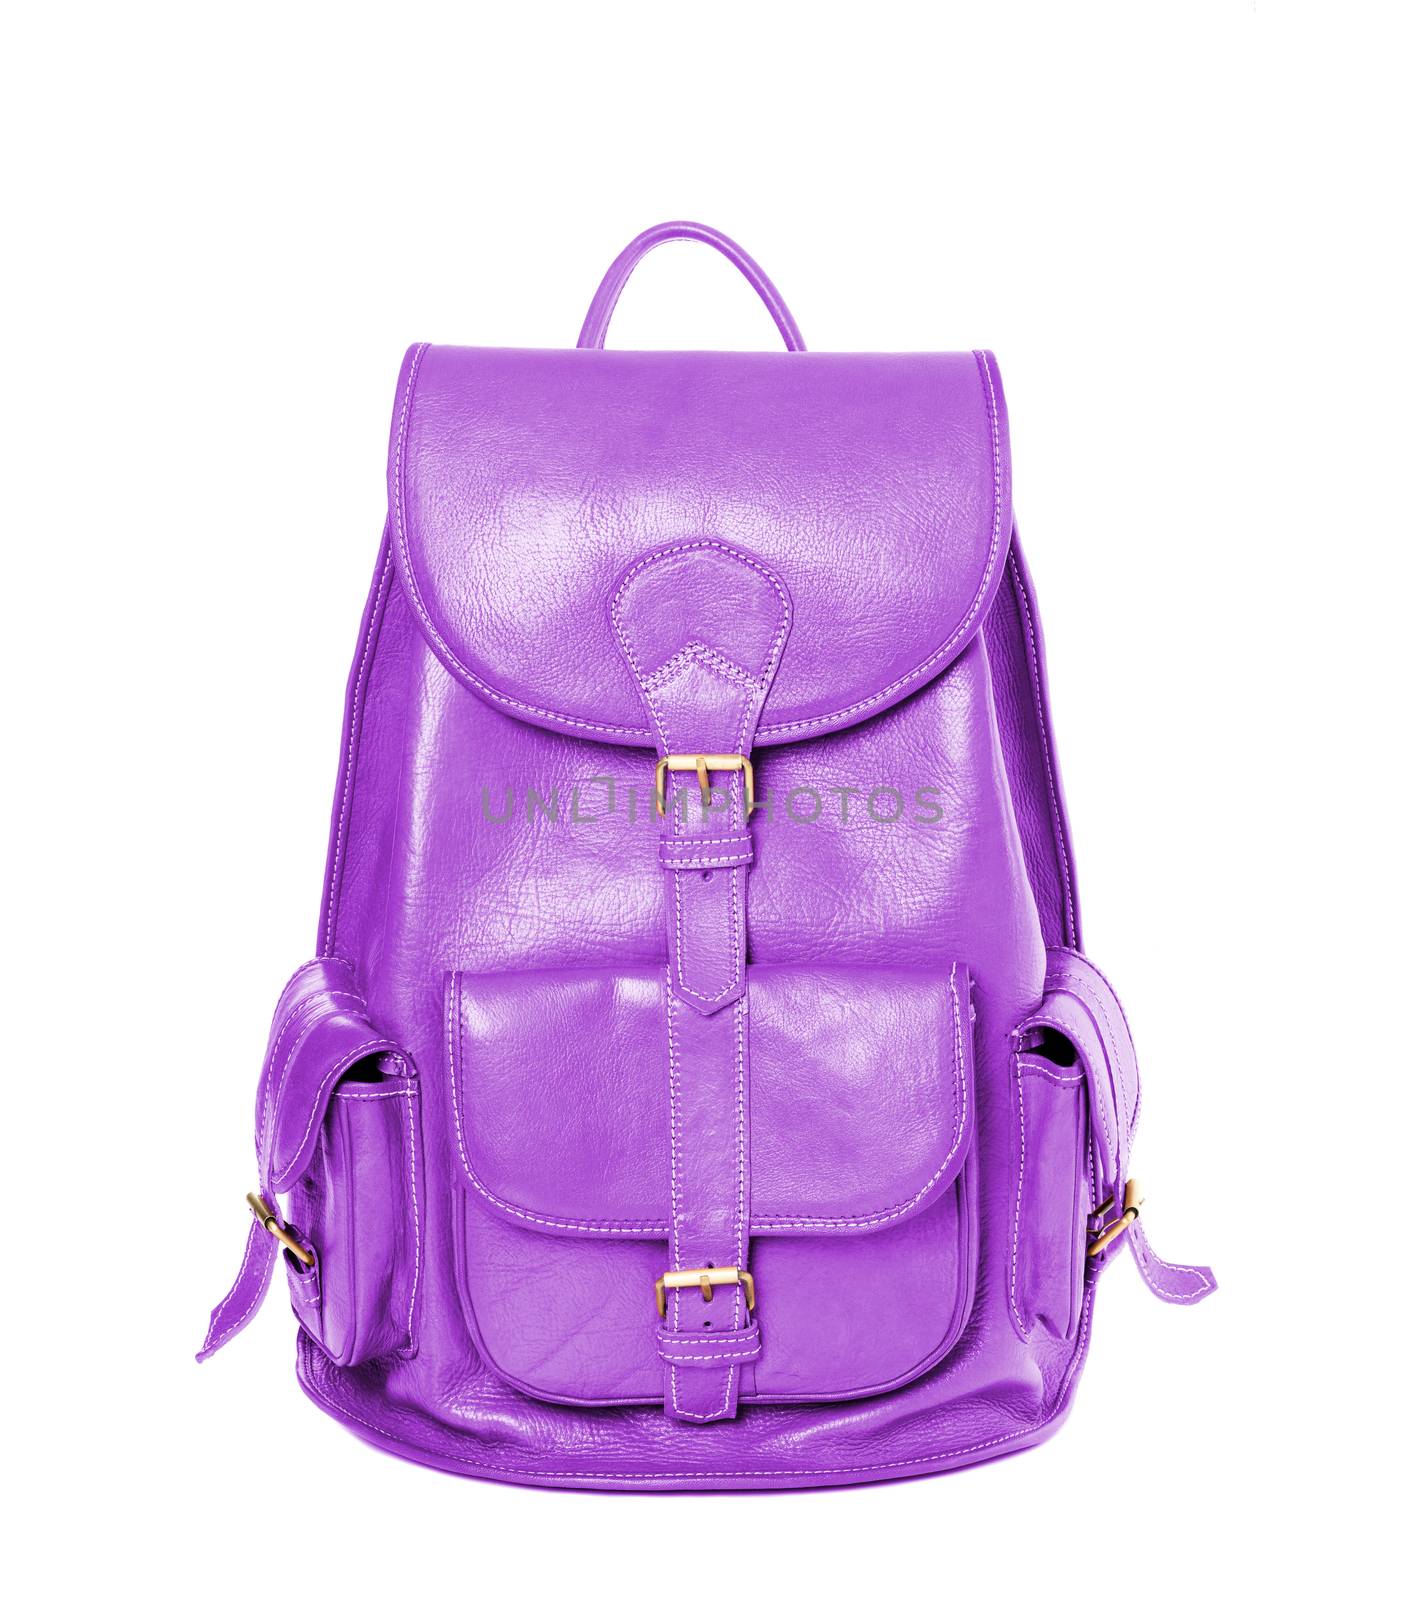 Leather backpack standing isolated on white magenta color by Nanisimova